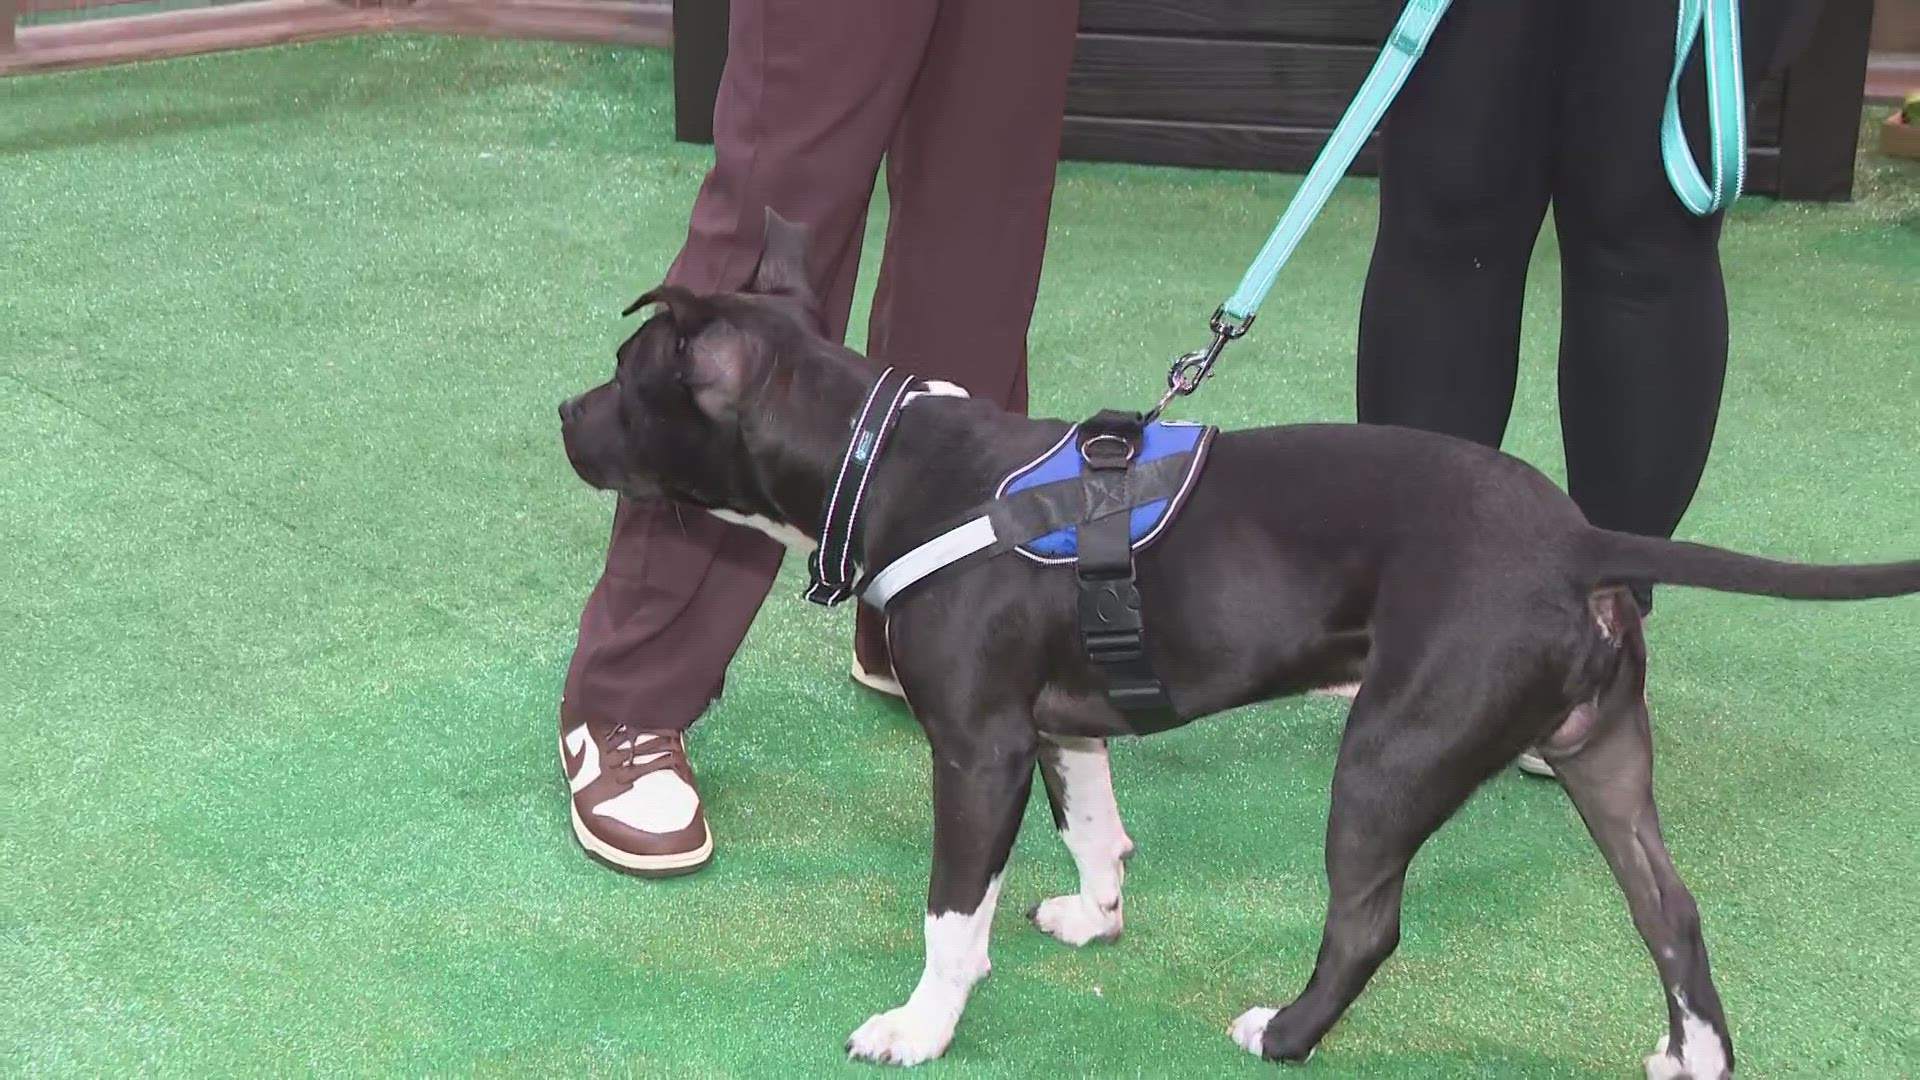 Pets are up for adoption at the Cleveland Auto Show.